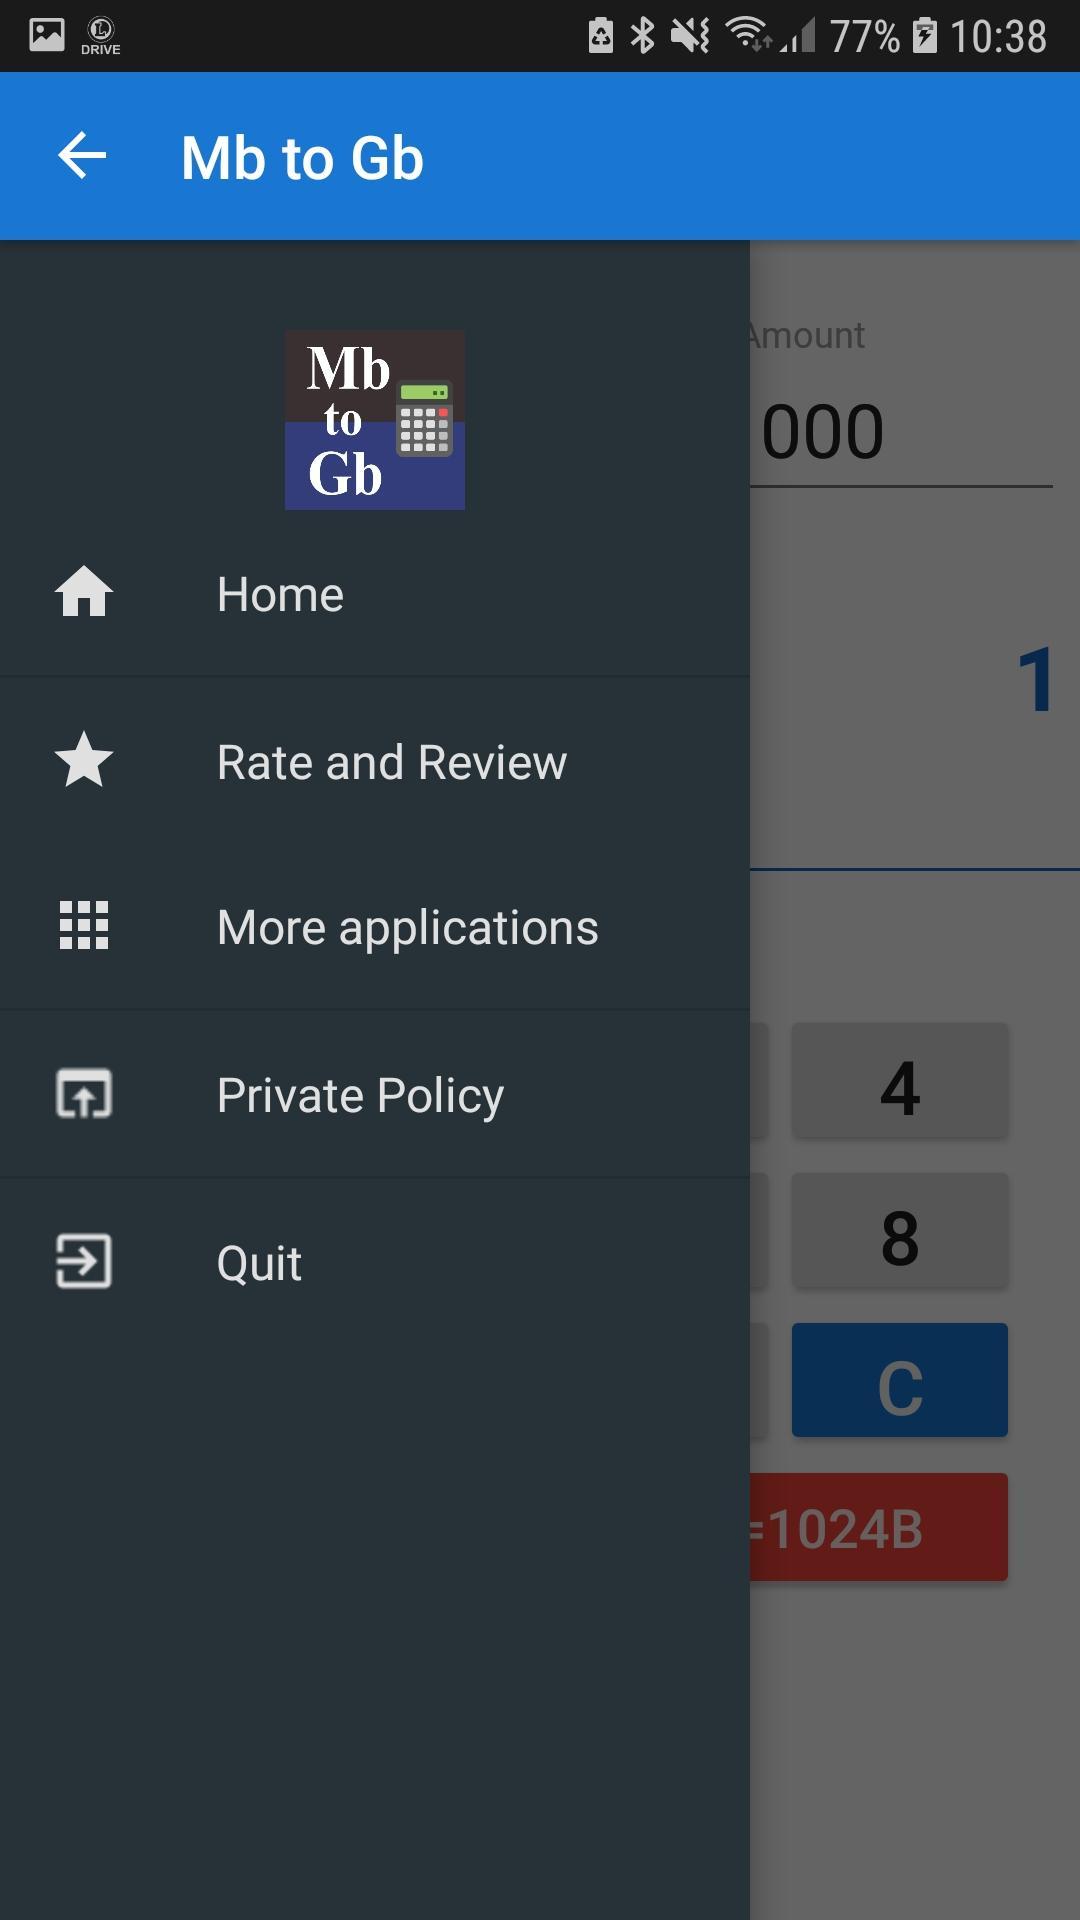 Mb to Gb for Android - APK Download